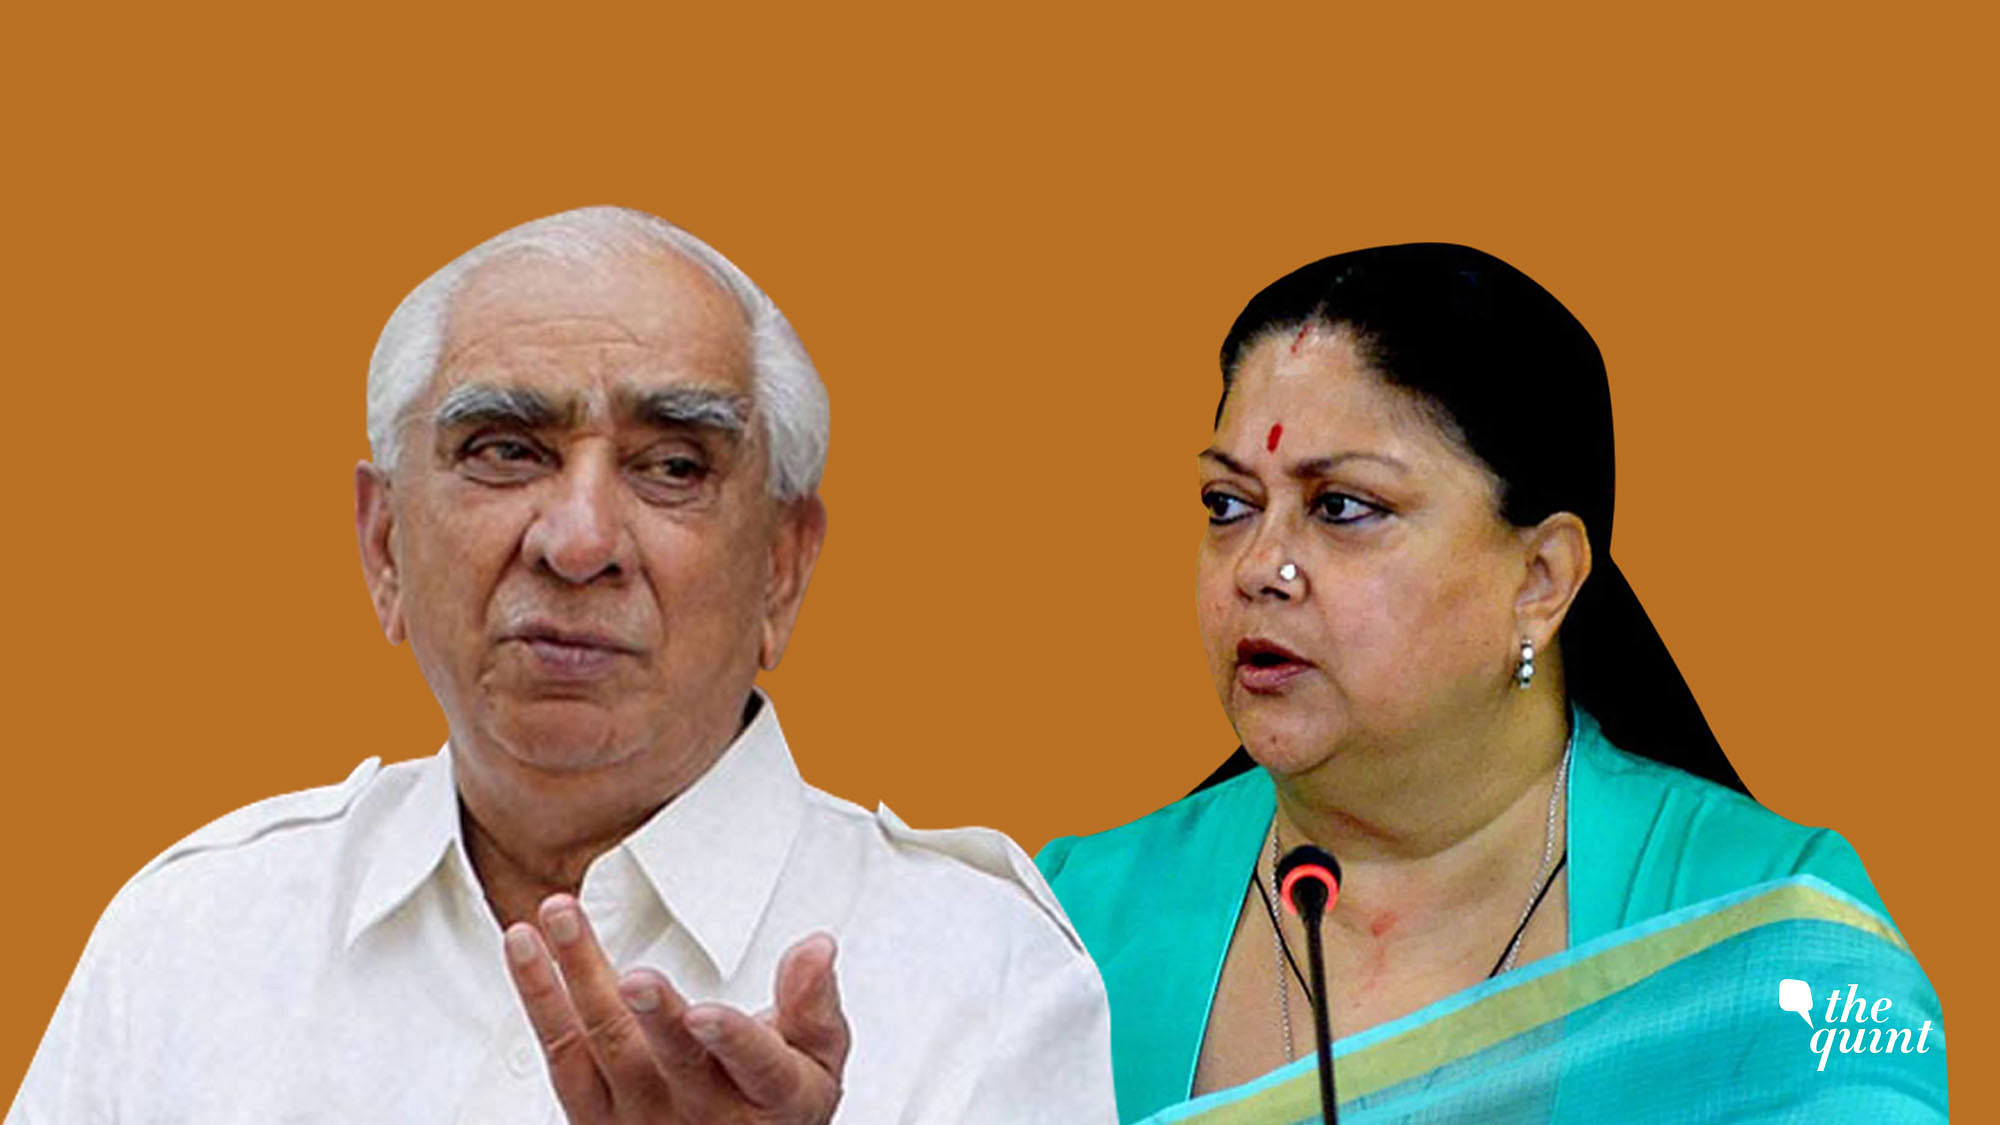 The roots of Manvendra’s revolt against BJP lies in the story behind Raje and Jaswant’s rocky history.